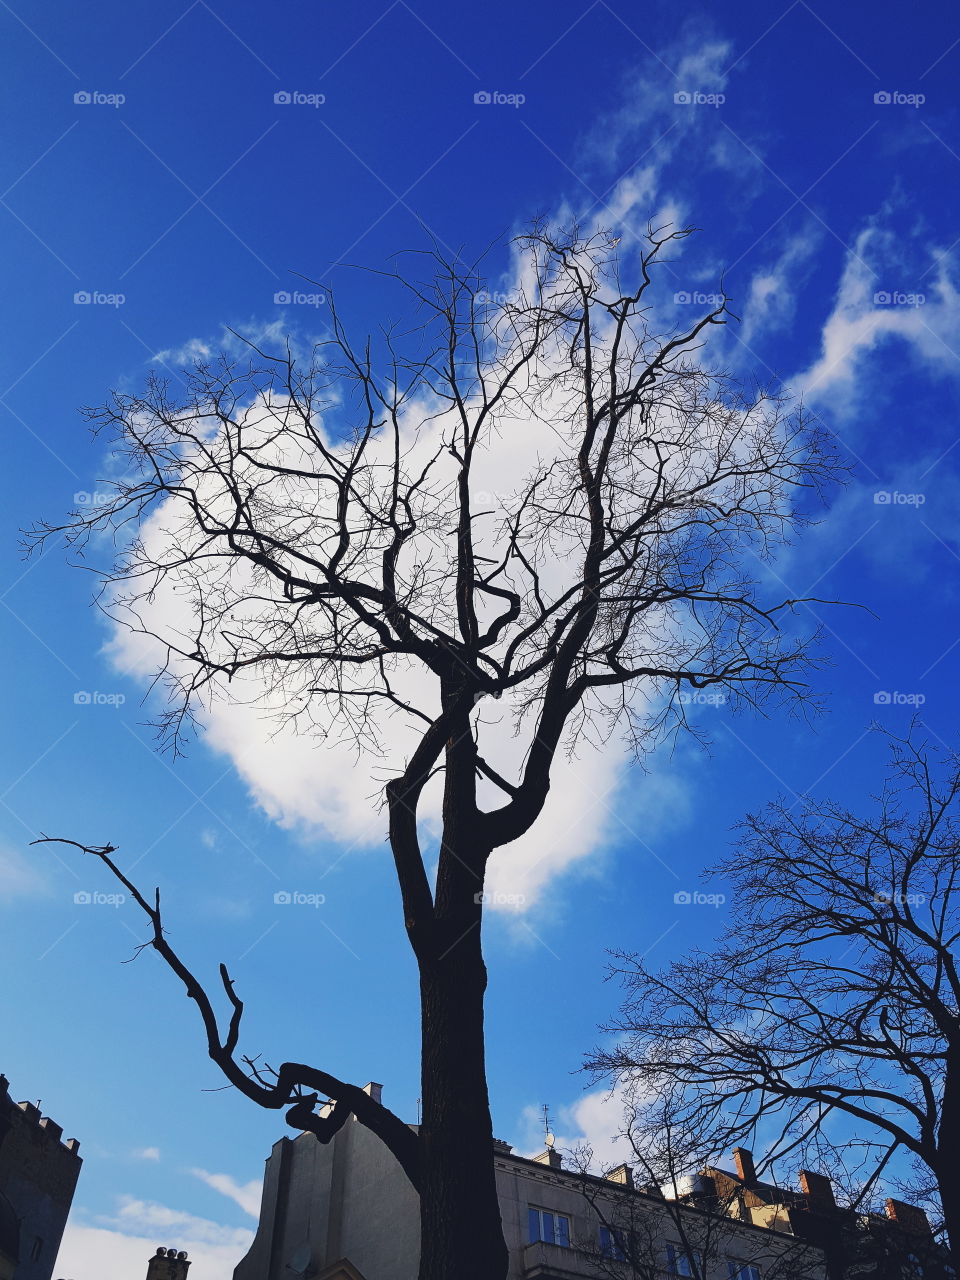 Clouds against a bare tree making it look like a white heart.